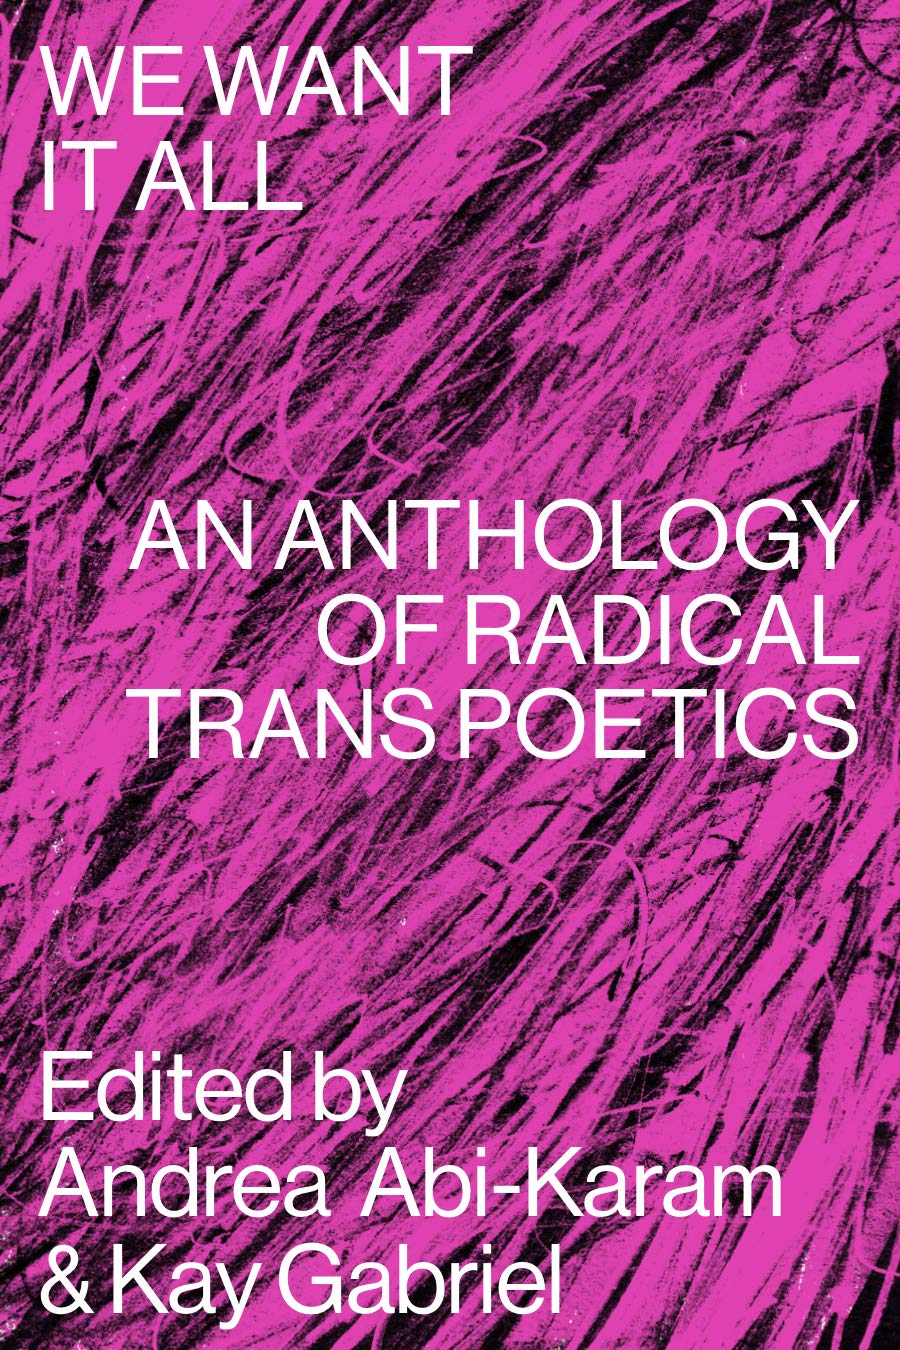 We Want It All: An Anthology of Radical Trans Poetics by Andrea Abi-Karam, Kay Gabriel